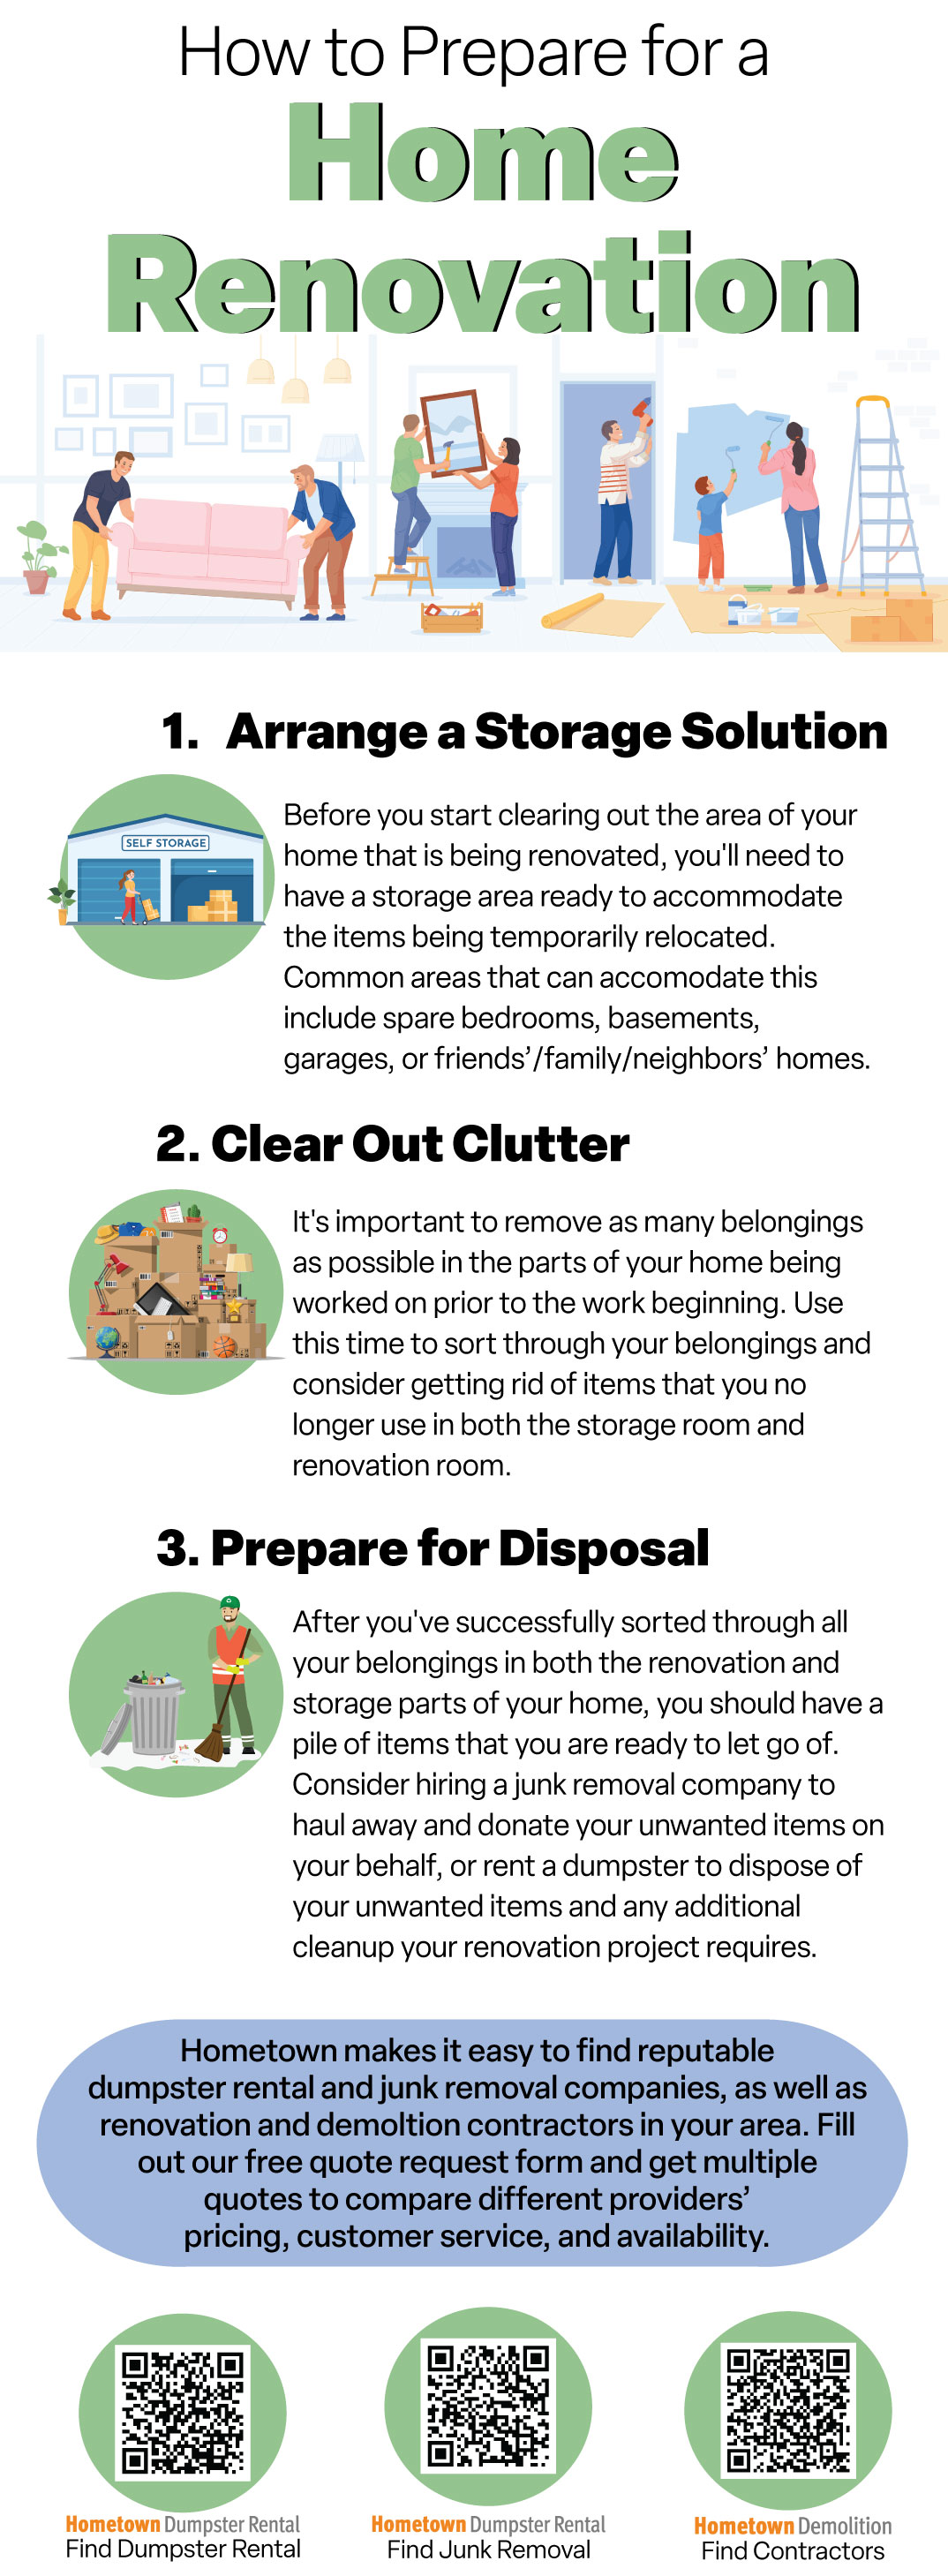 How to Prepare for a Home Renovation Infographic